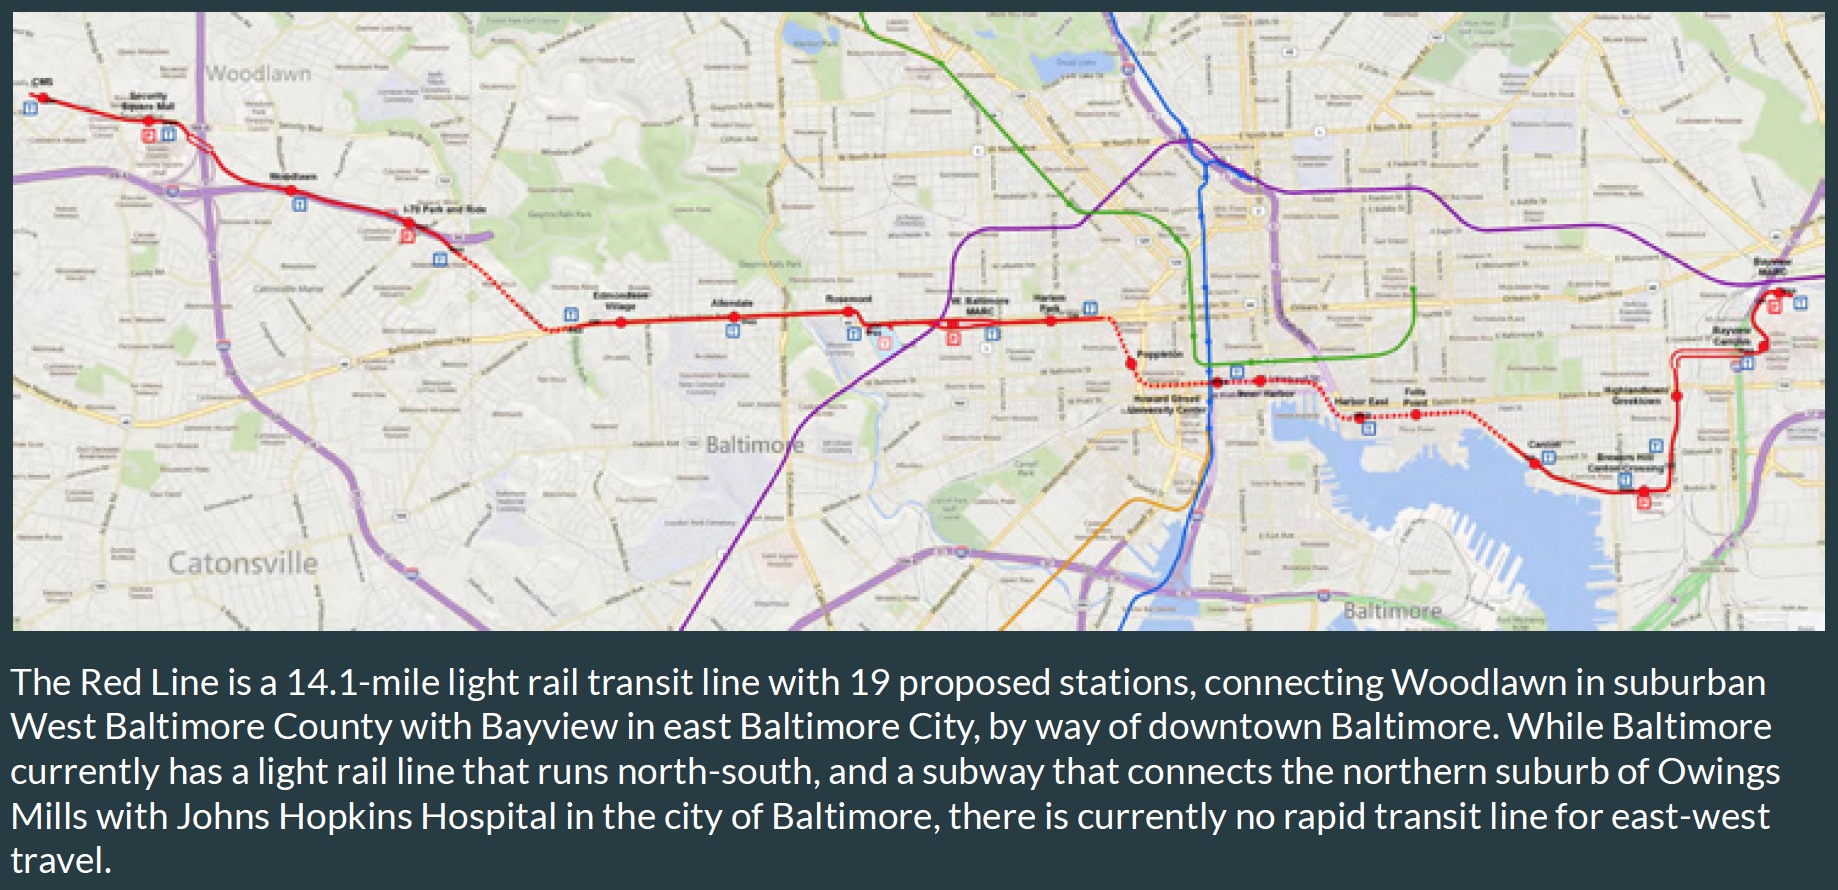 The Red Line is a 14.1-mile light rail transit line with 19 proposed stations, connecting Woodlawn in suburban West Baltimore County with Bayview in east Baltimore City, by way of downtown Baltimore.